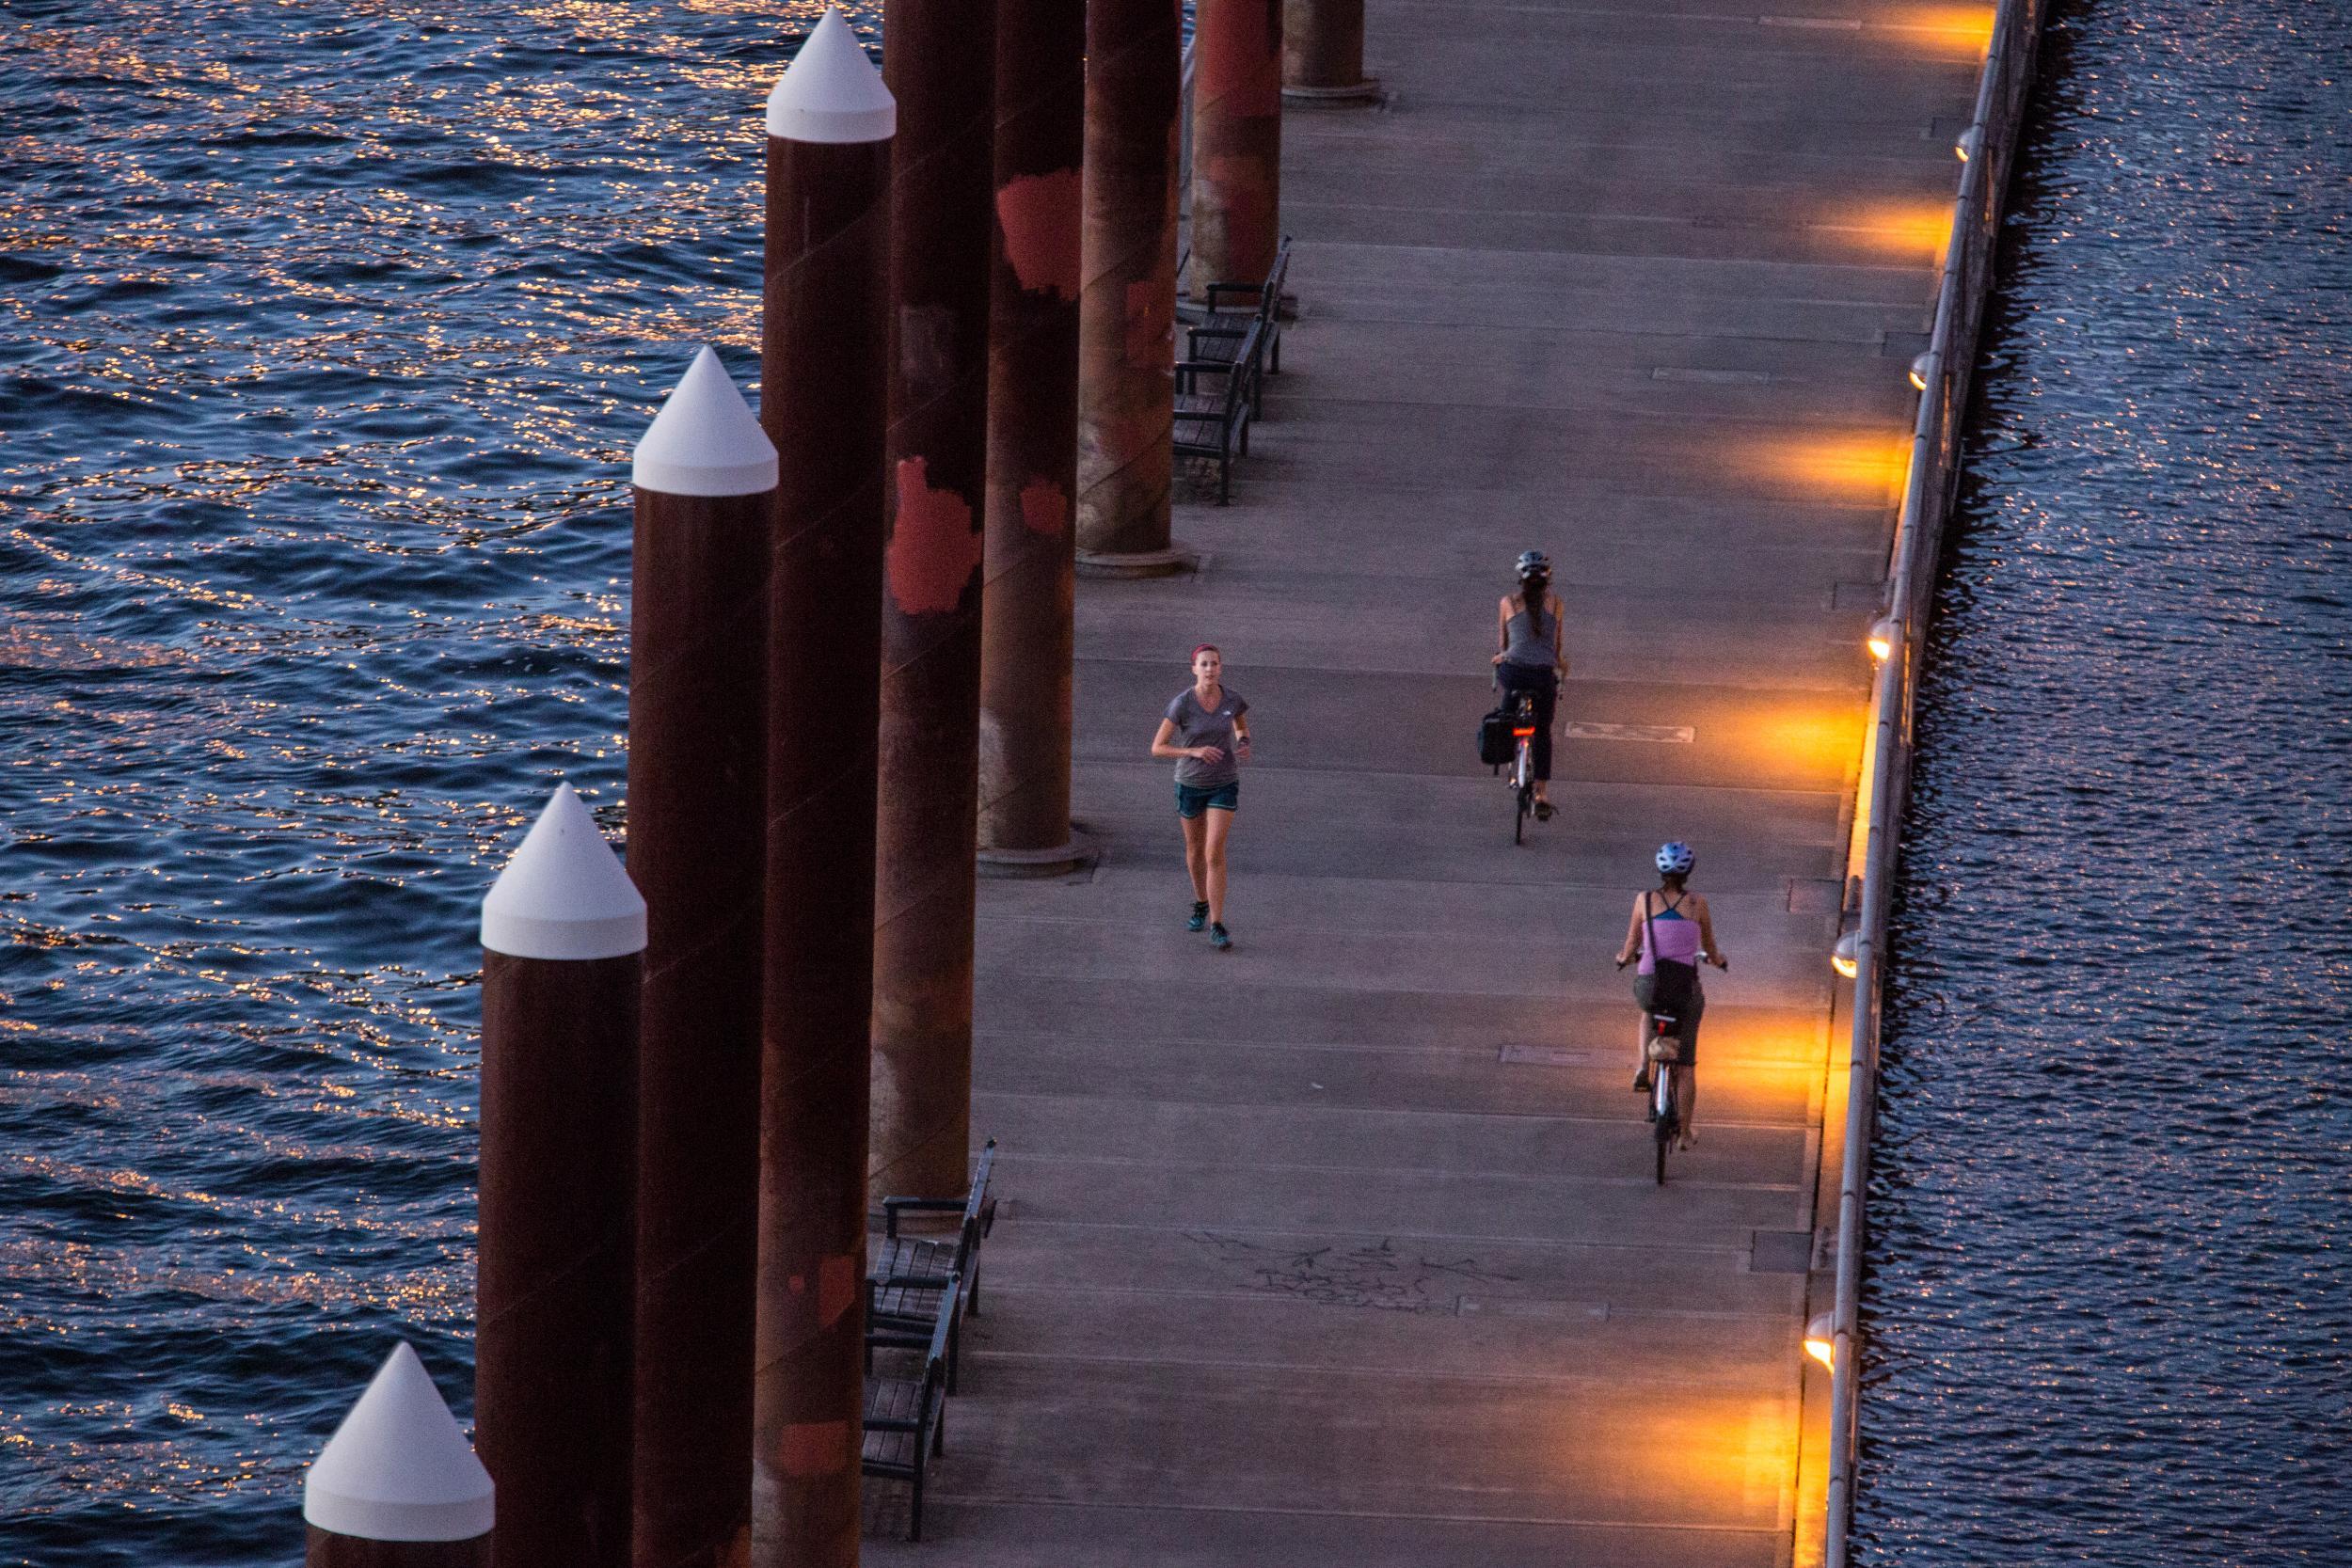 Portland’s reputation as a runner’s paradise is well deserved